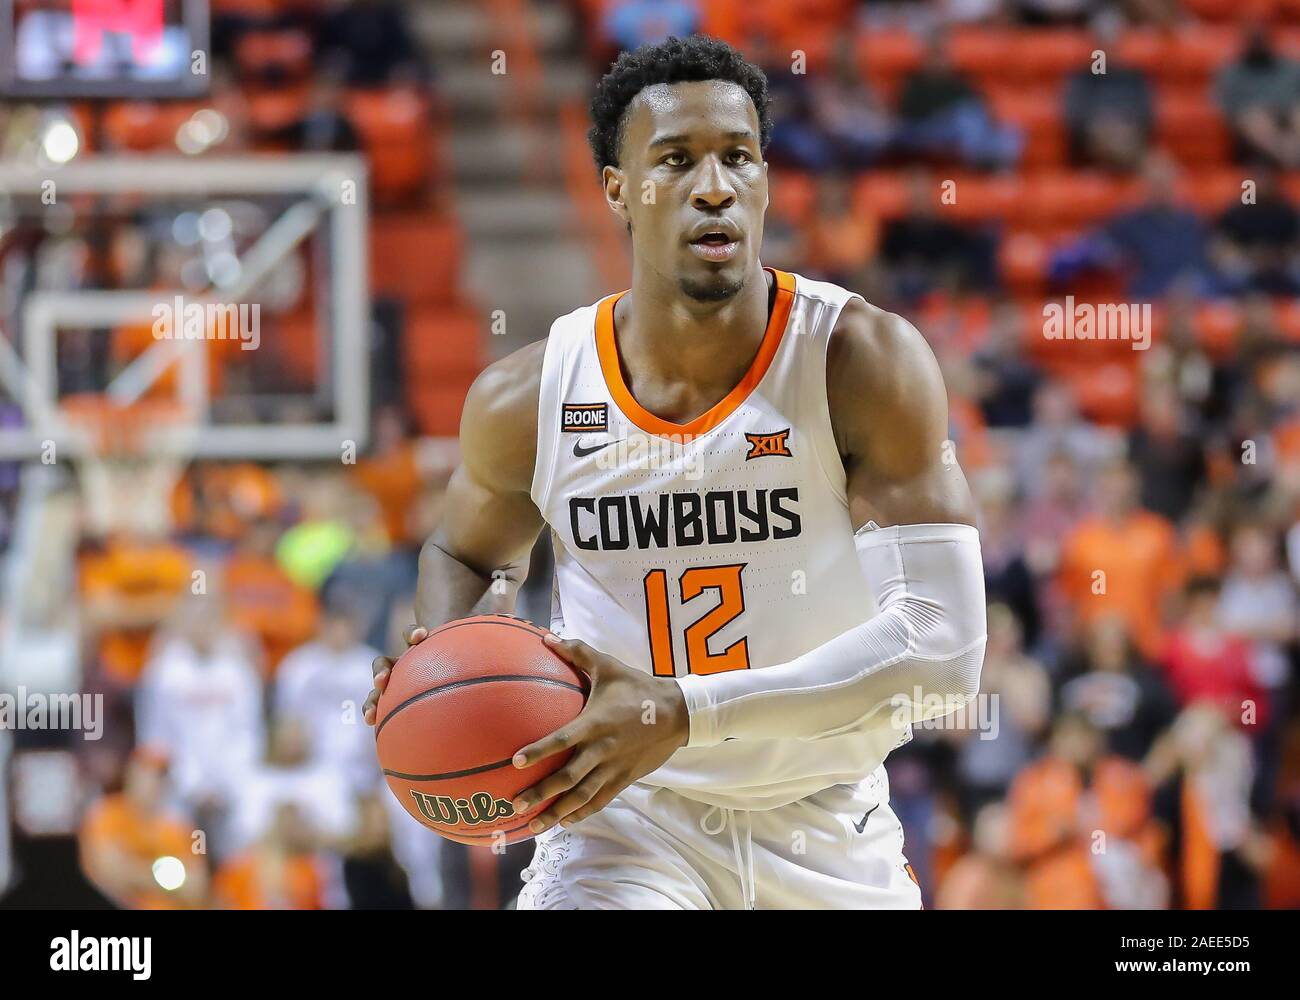 Stillwater, OK, USA. 8th Dec, 2019. Oklahoma State forward Cameron McGriff (12) during a basketball game between the Wichita State Shockers and Oklahoma State Cowboys at Gallagher-Iba Arena in Stillwater, OK. Gray Siegel/CSM/Alamy Live News Stock Photo